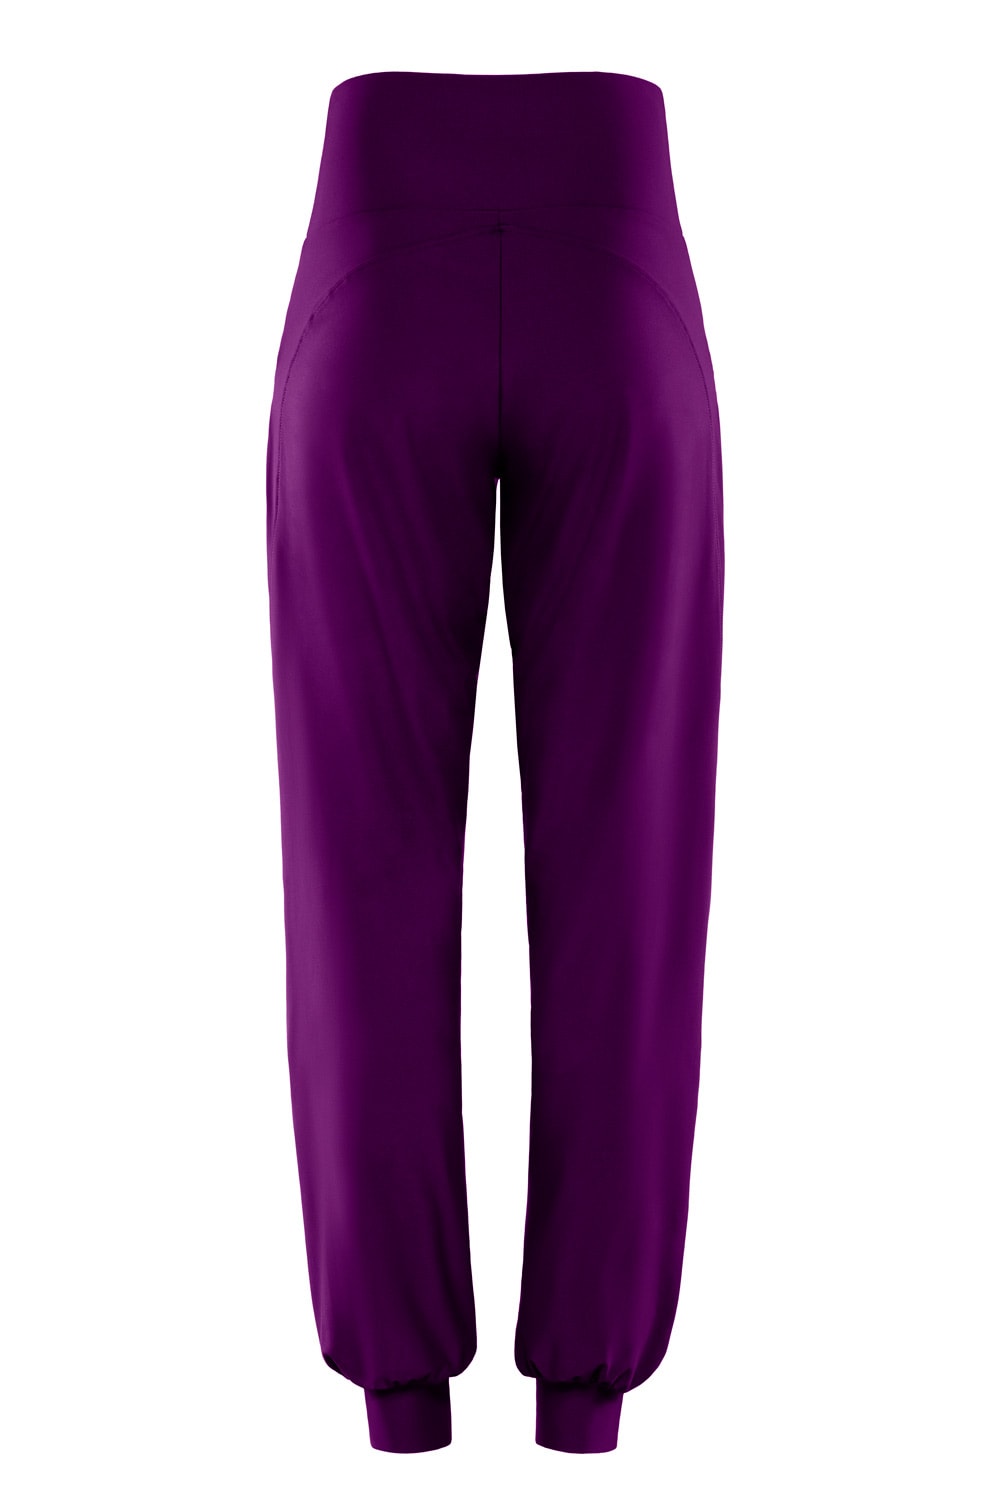 Finde Winshape Sporthose Comfort Time Leisure Waist LEI101C«, Trousers High auf »Functional